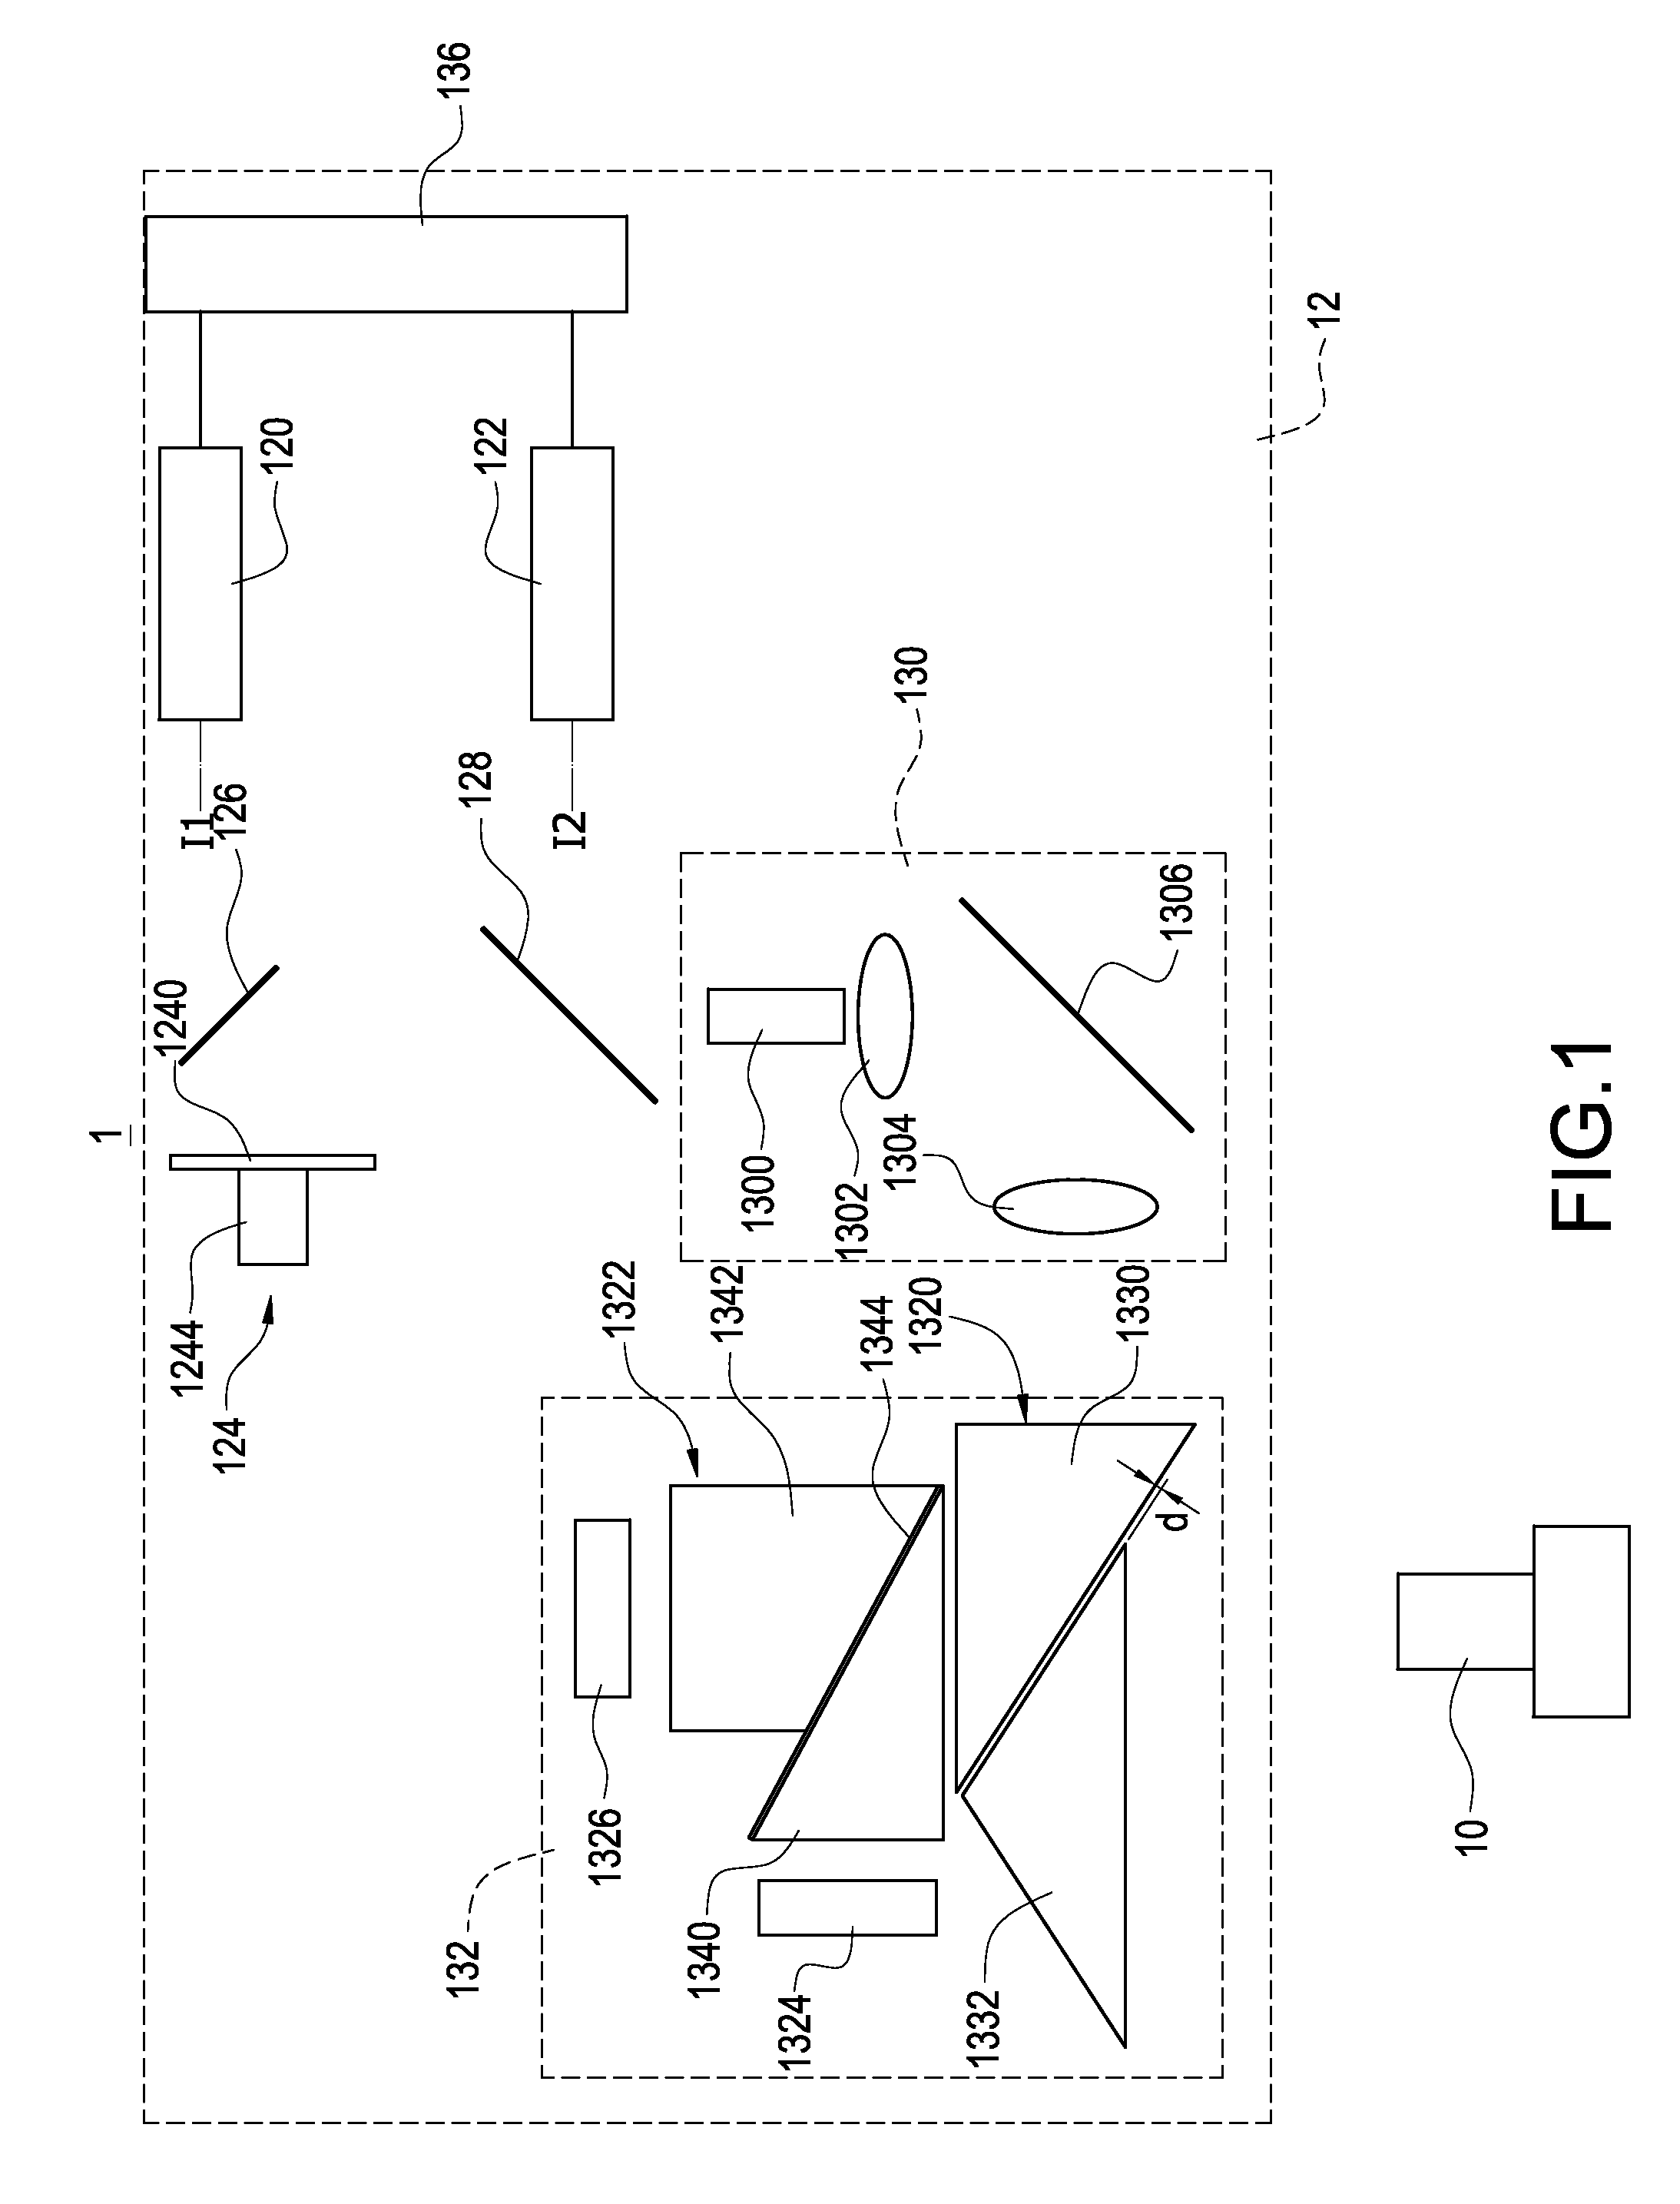 Optical projecting apparatus